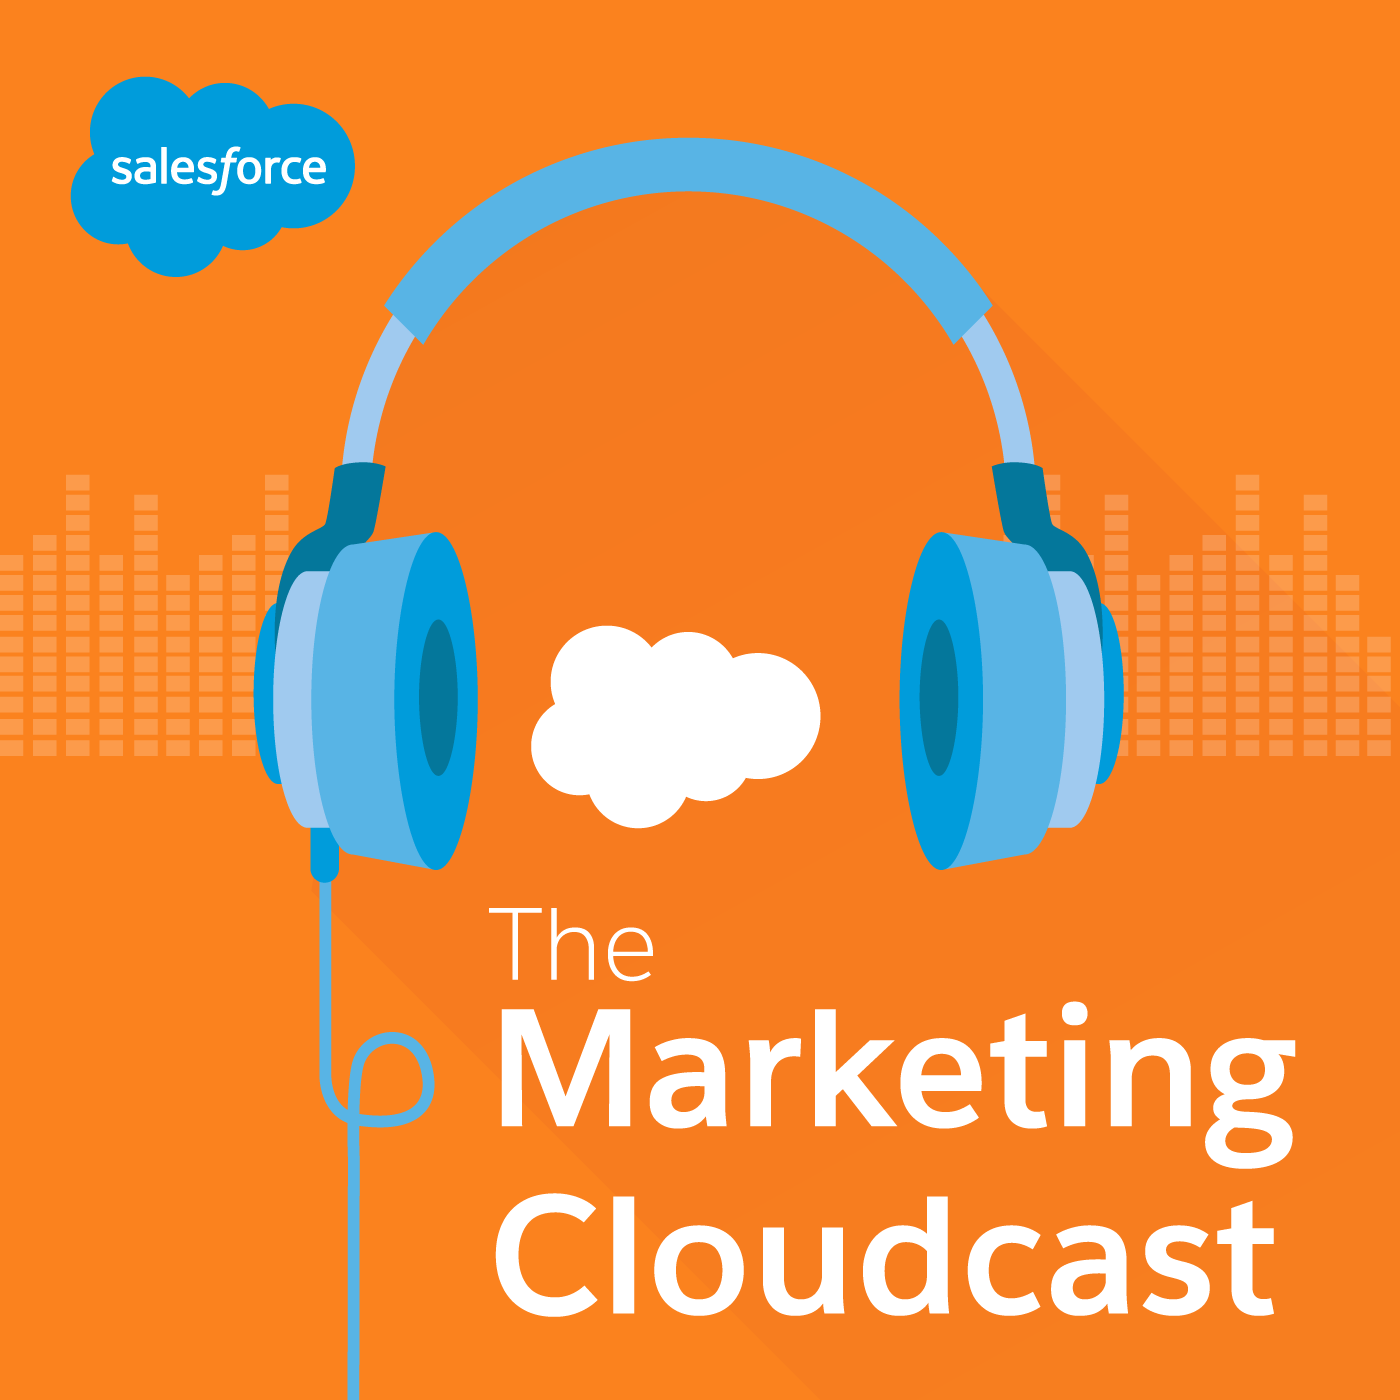 The New Marketing Podcast from Salesforce is Here: Introducing the Marketing Cloudcast